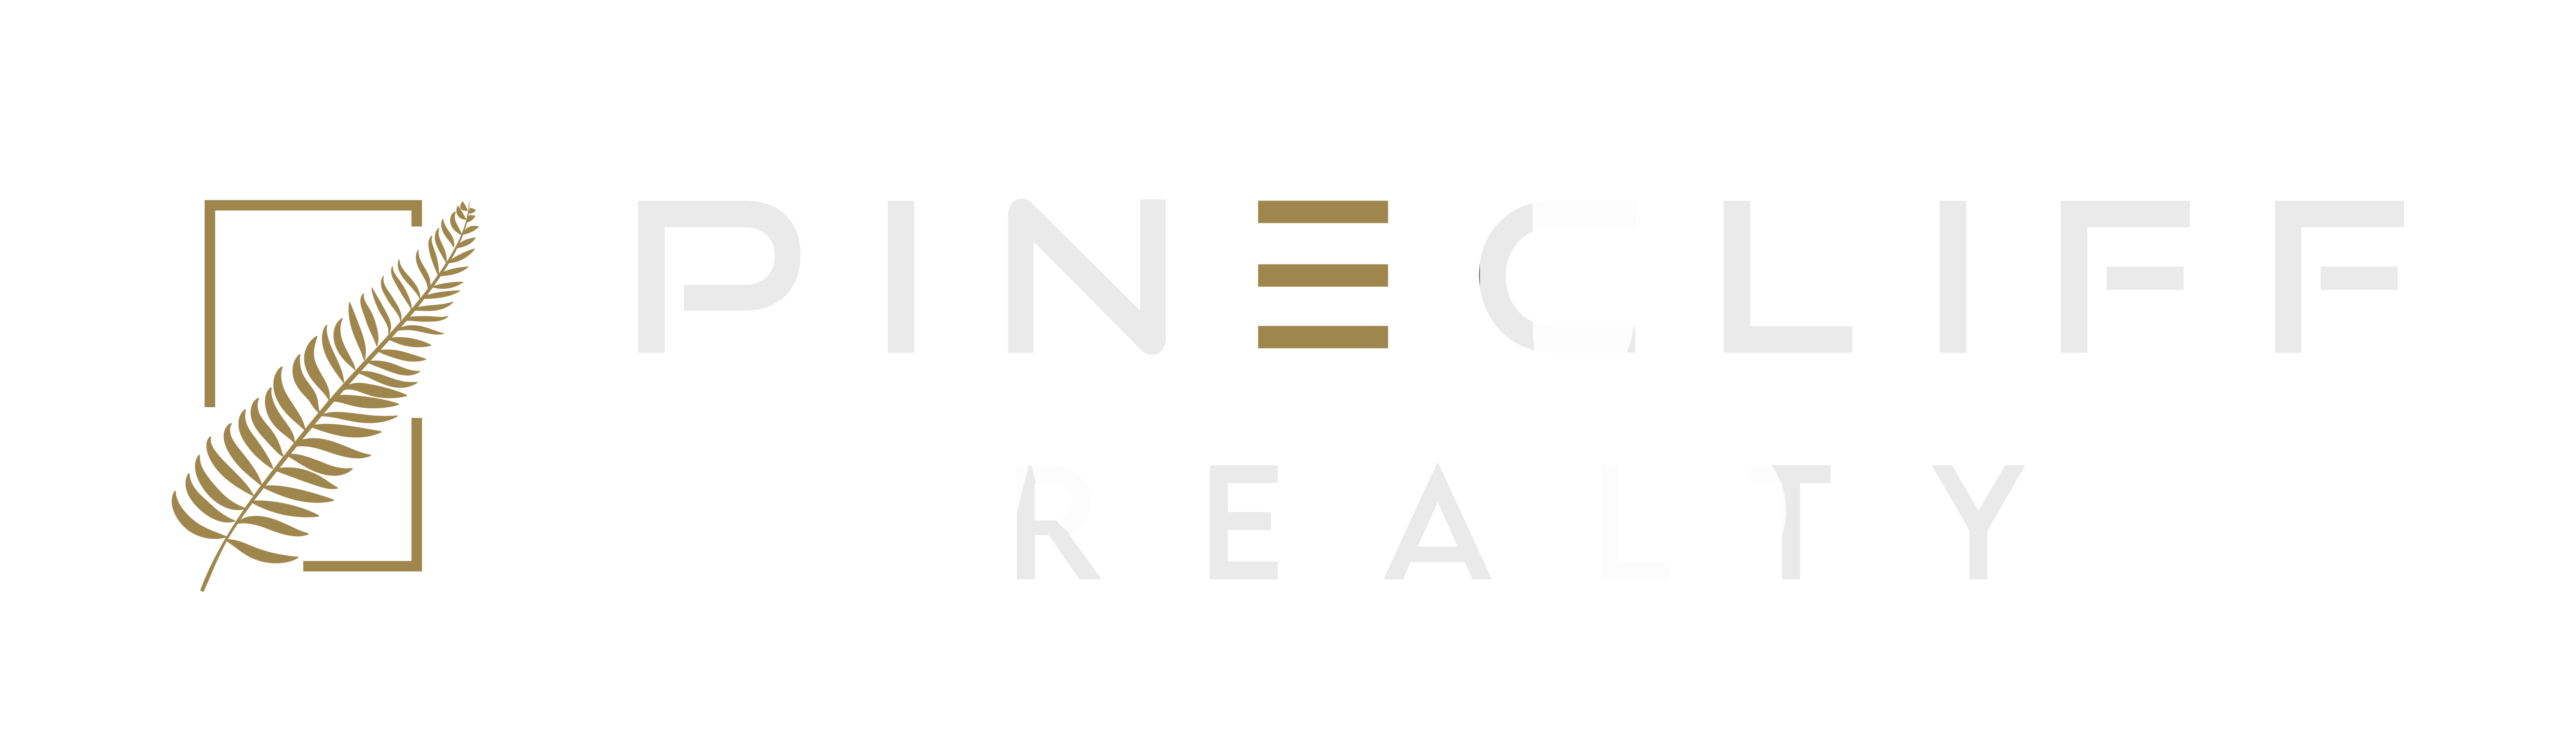 Pinecliff Realty